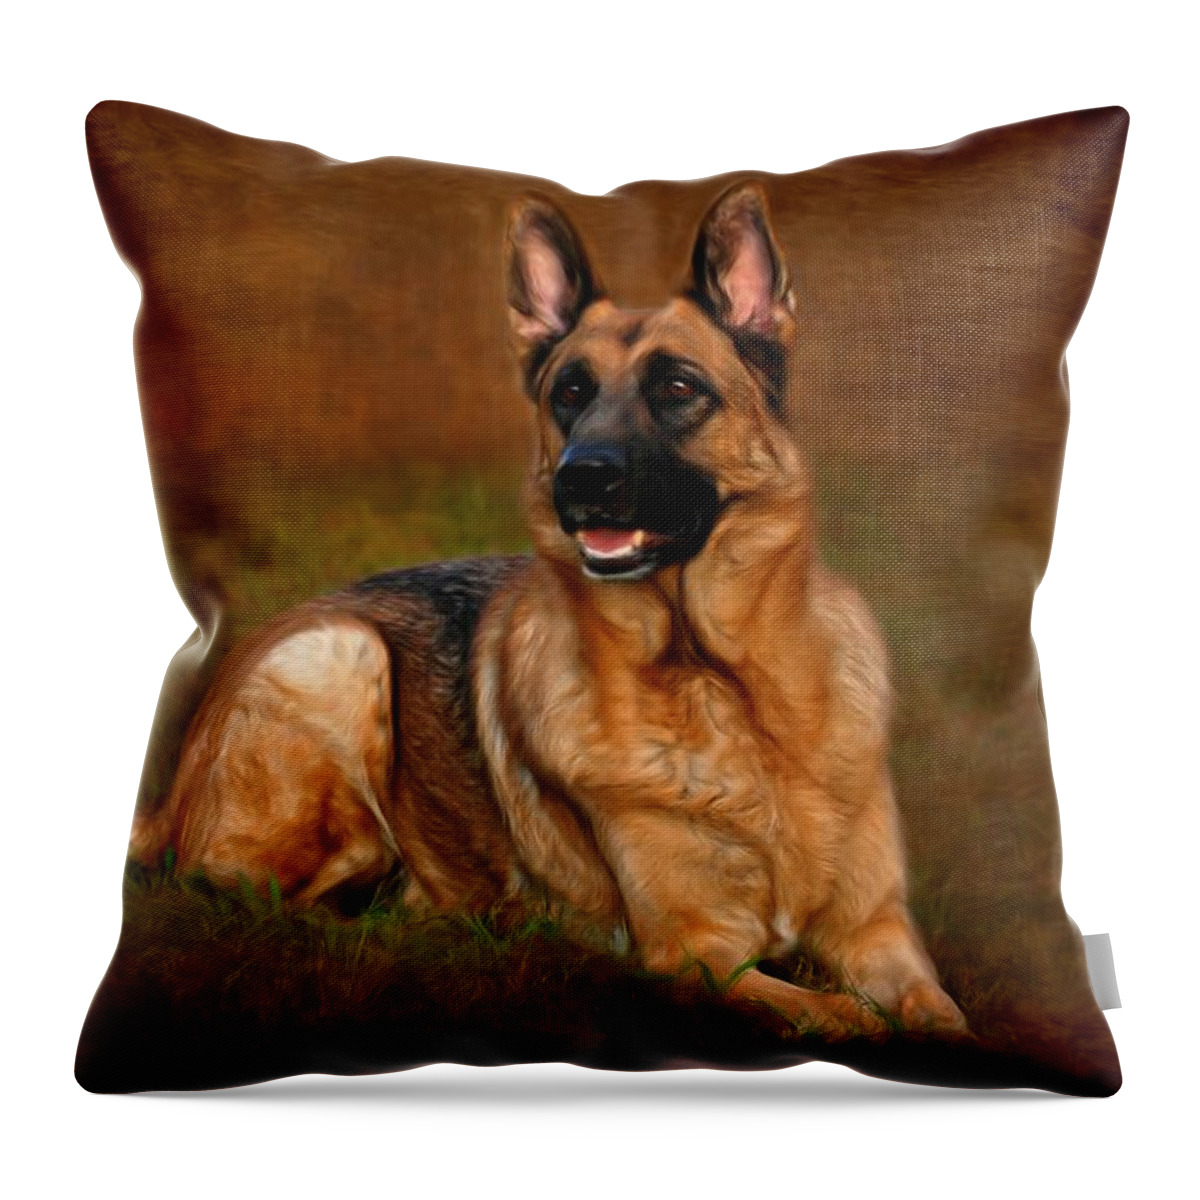 German Shepherd Dogs Throw Pillow featuring the photograph Forrest The German Shepherd by Angie Tirado